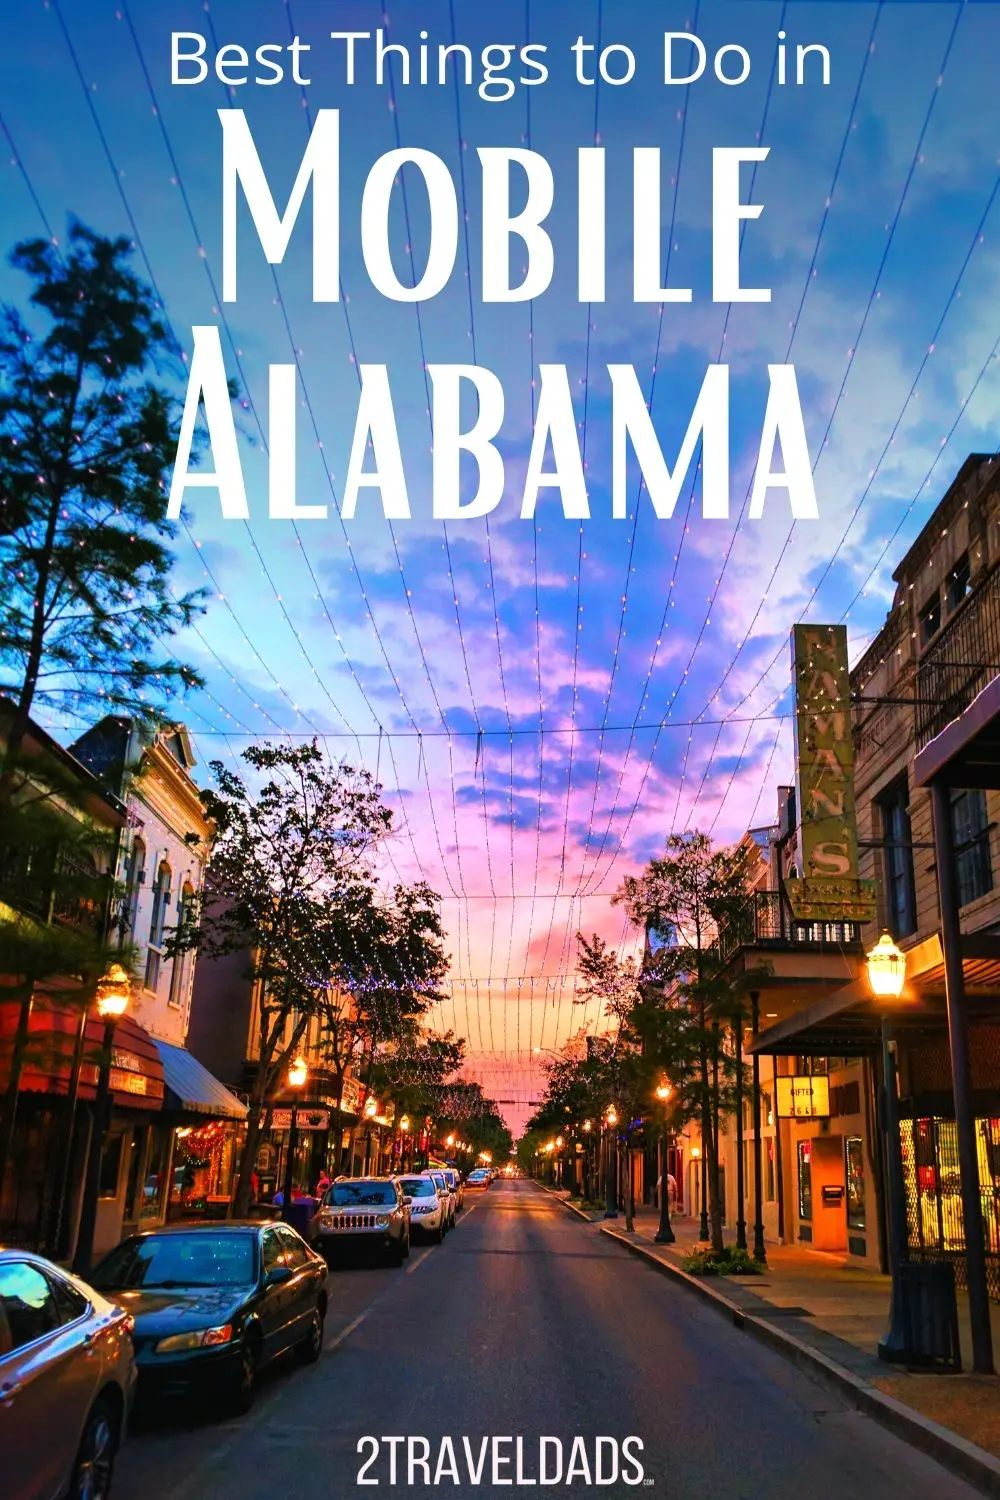 Mobile, Alabama is a fun, mellow alternative to New Orleans. The best things to do in Mobile, Alabama range from walking the wrought iron balcony lined streets to airboat rides to find alligators. So much to do in Mobile!